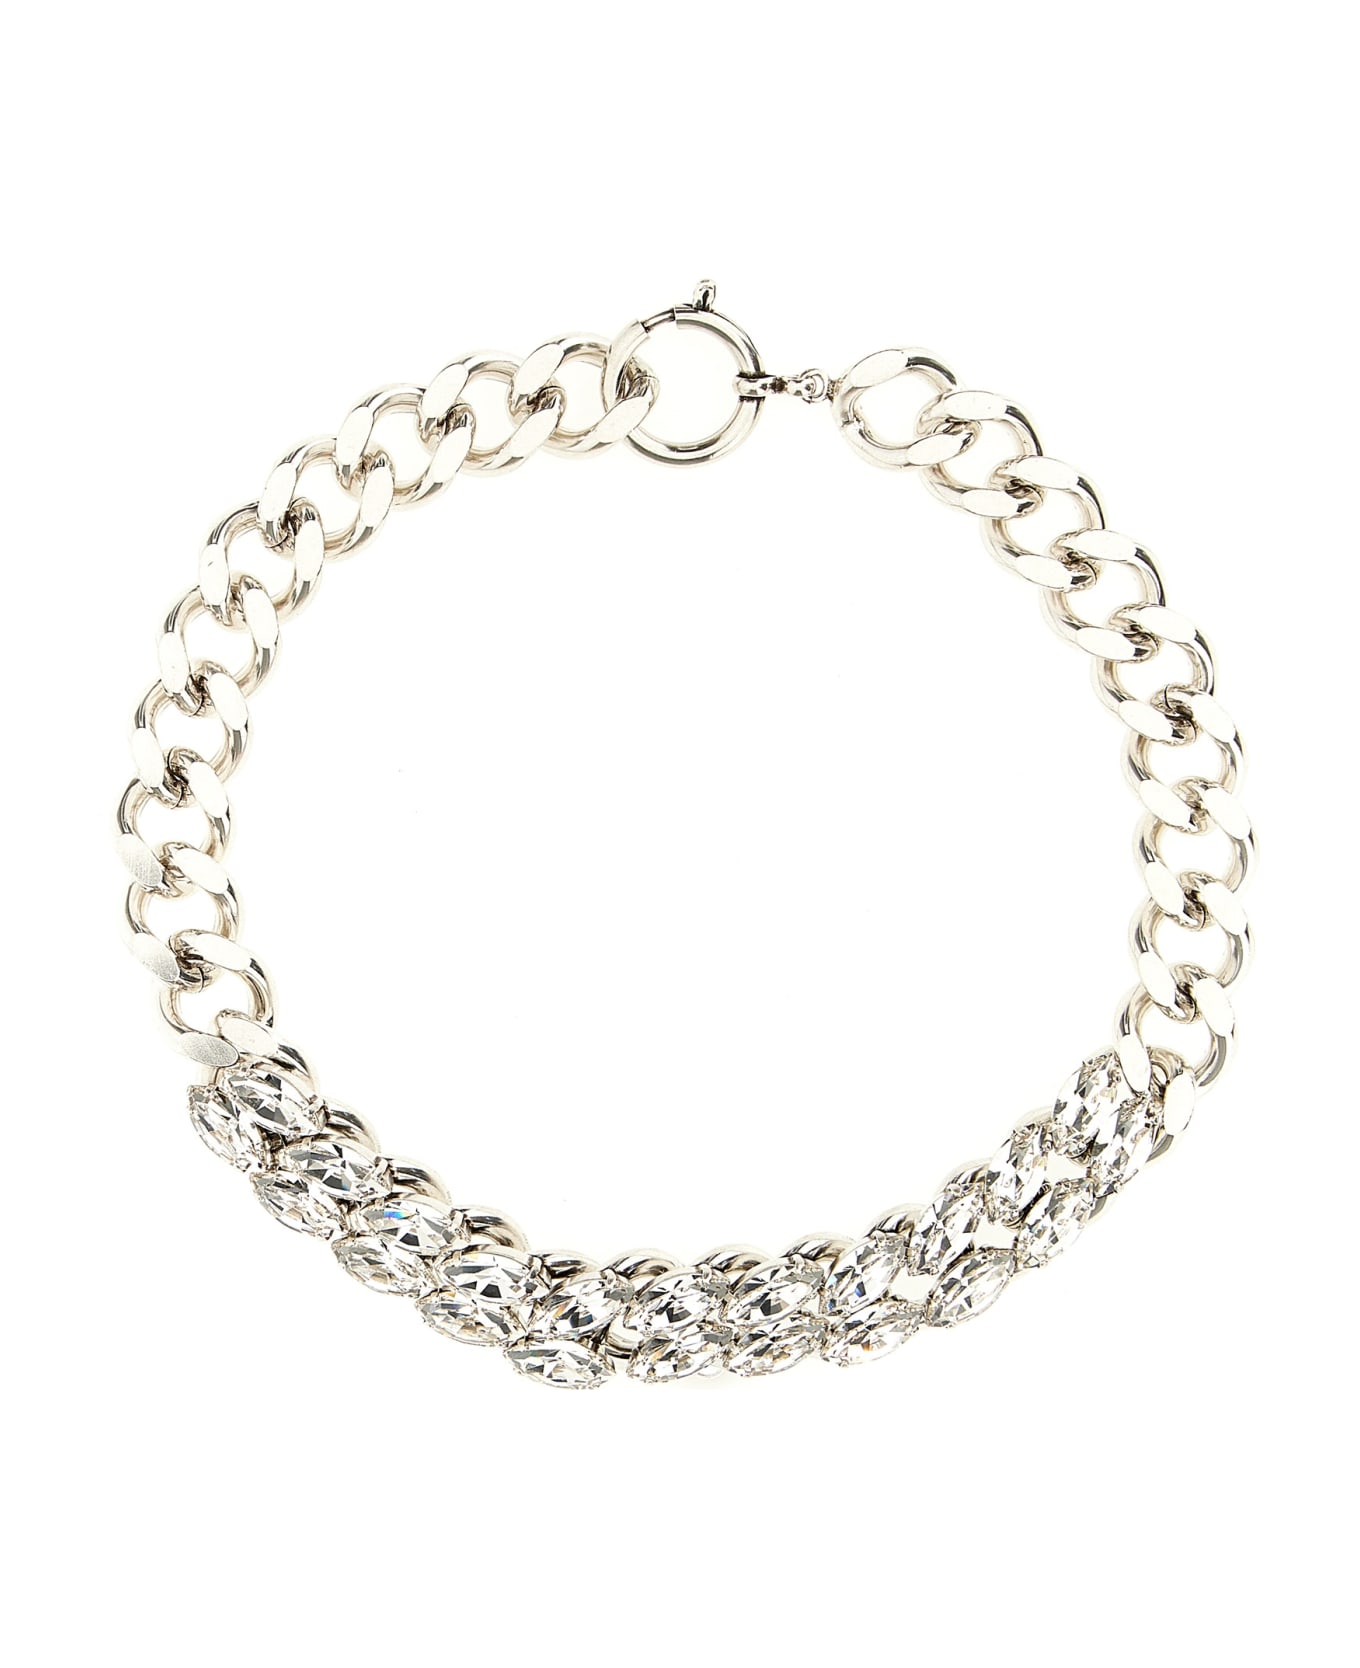 Isabel Marant Chain Necklace With Crystals - Silver